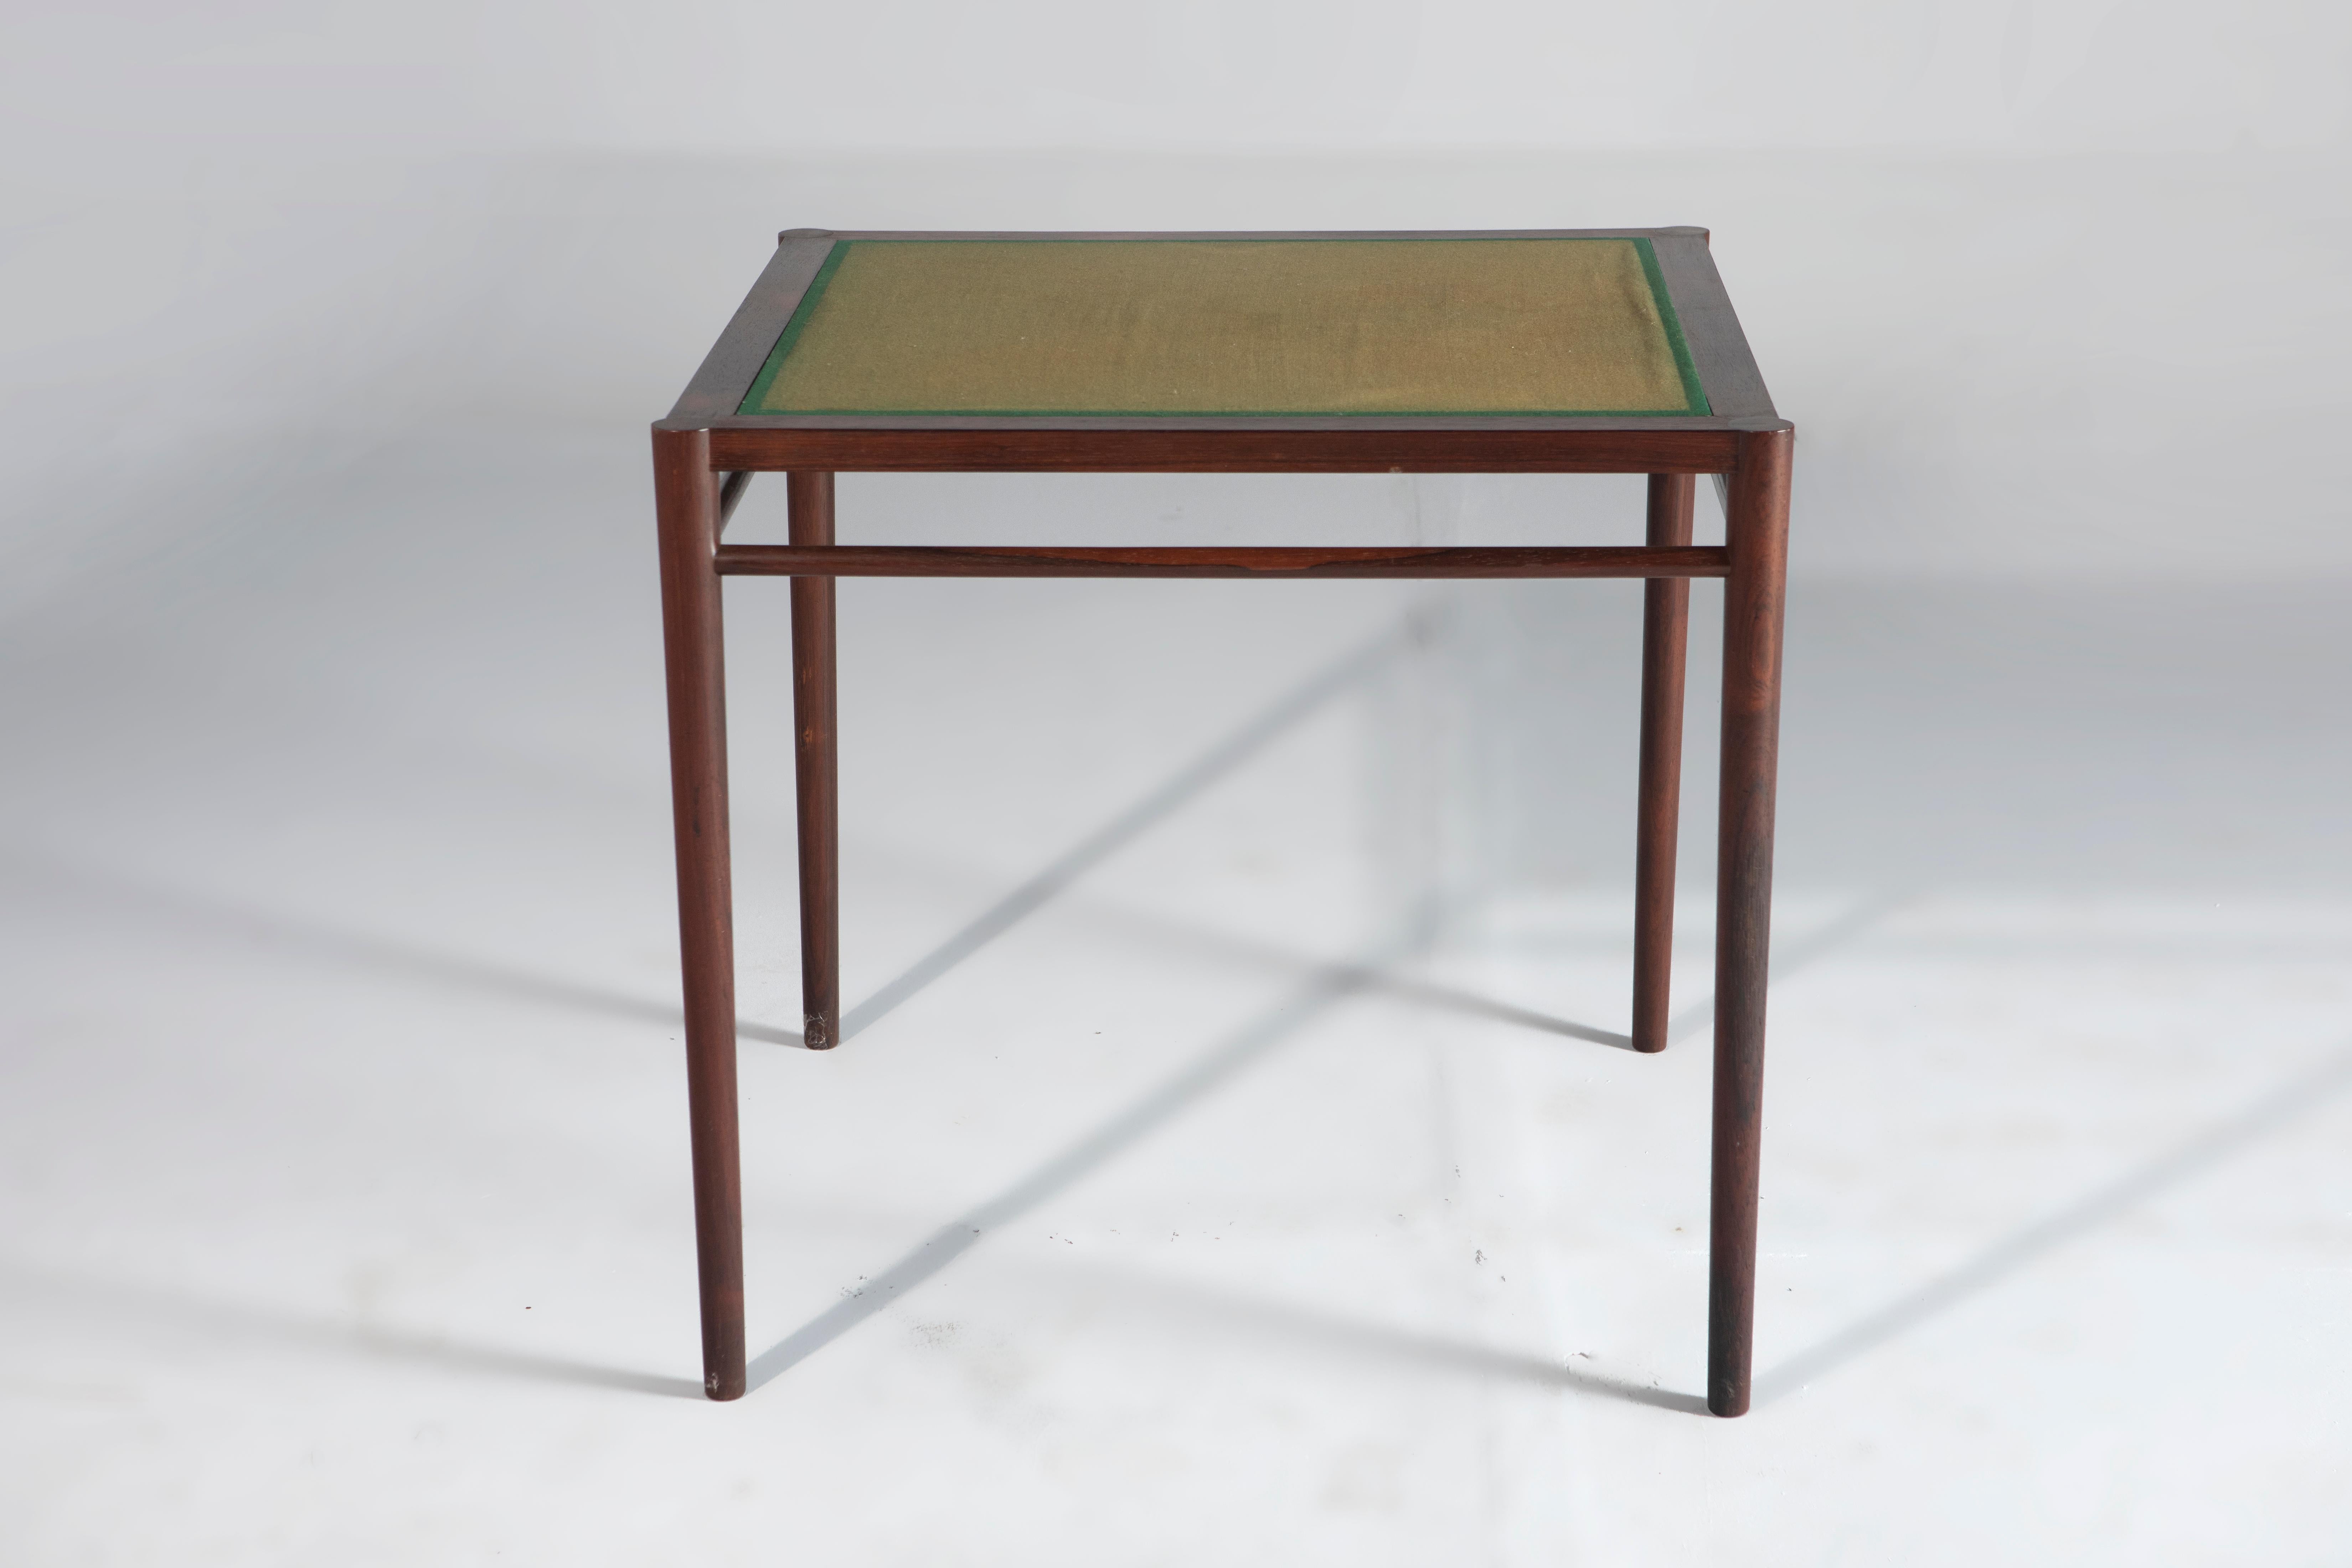 Varnished Mid-Century Modern Game Table by Mobília Contemporânea, 1960s For Sale